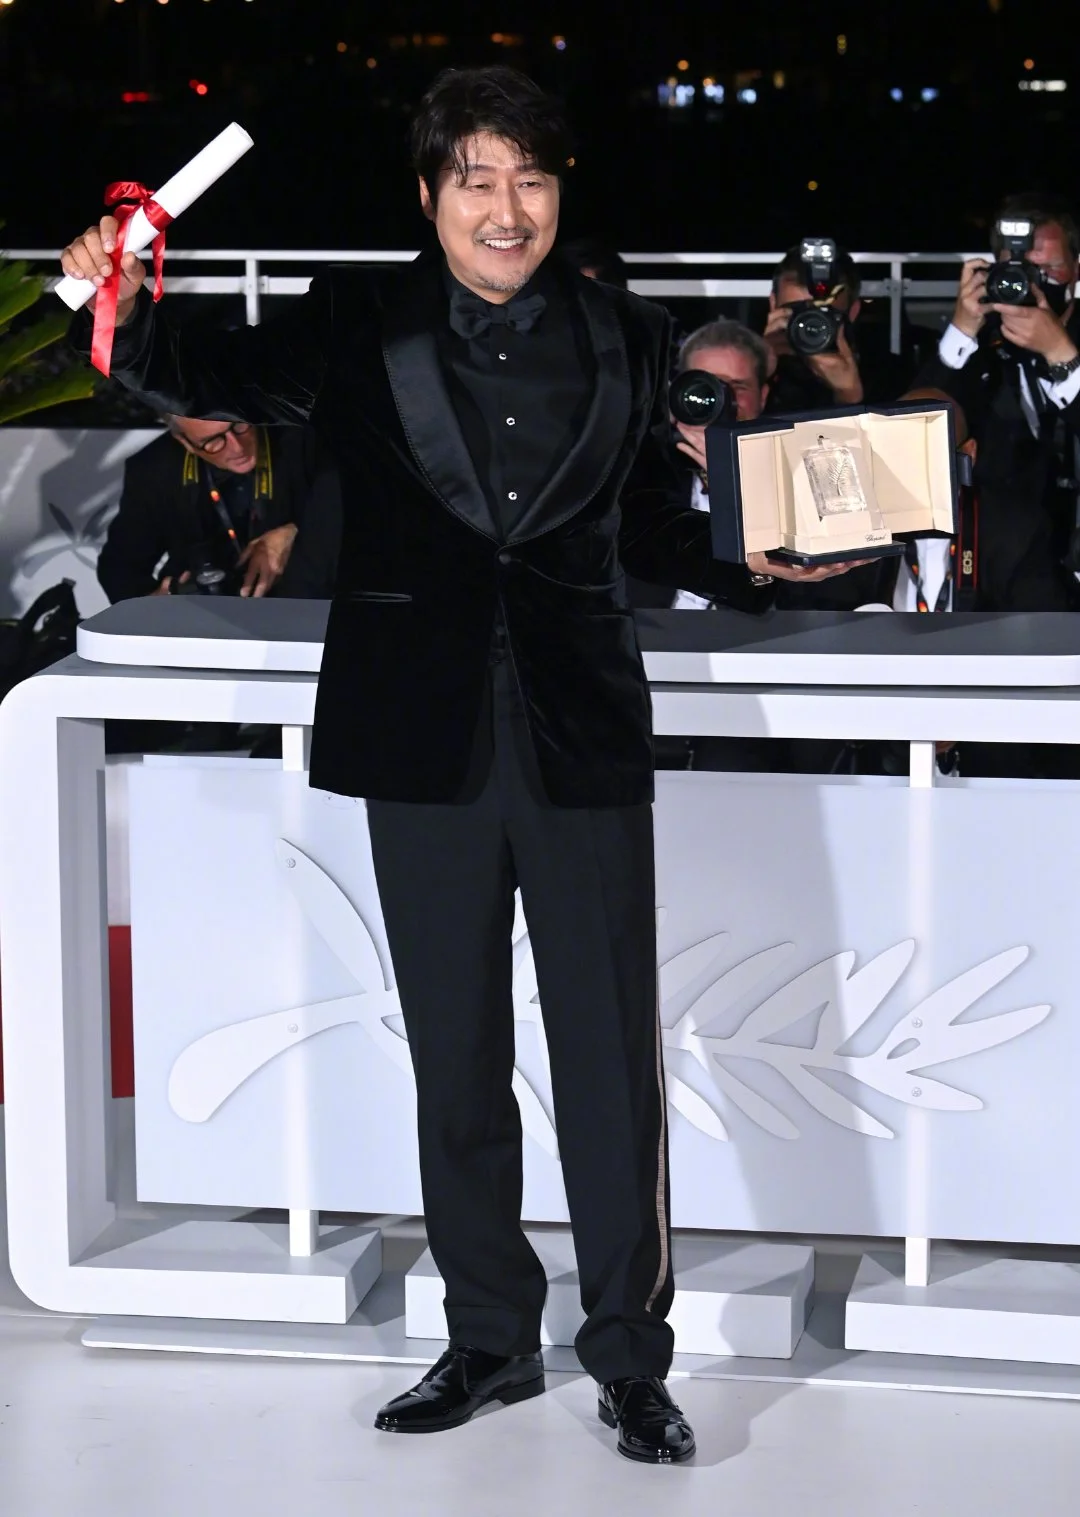 Kang-ho Song becomes South Korea's first best actor at Cannes Film Festival